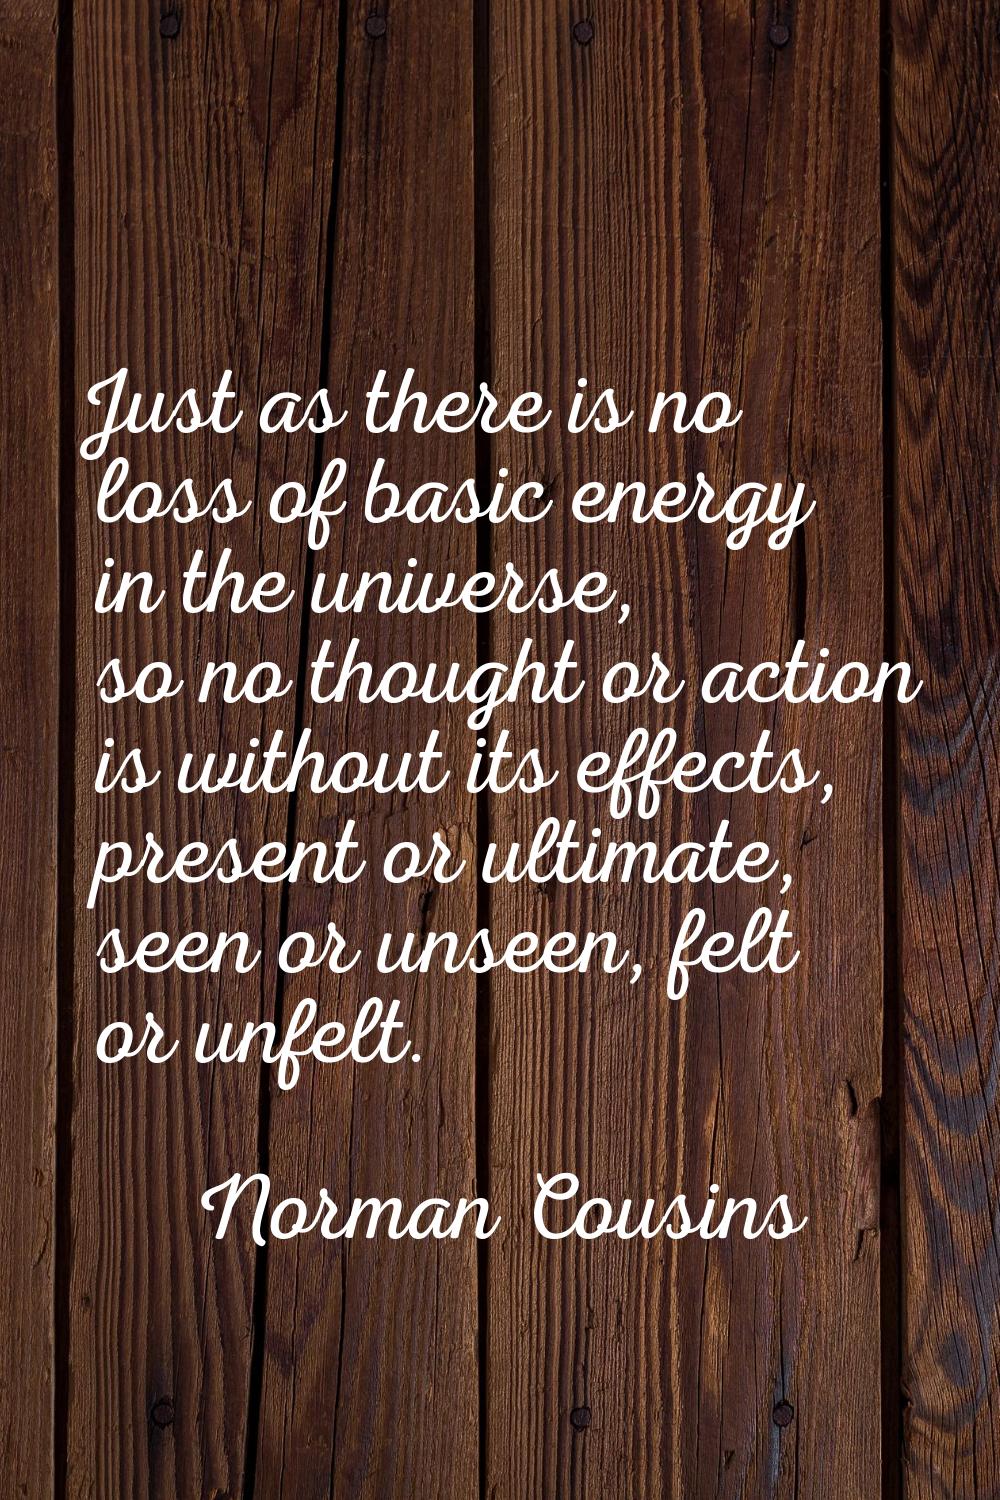 Just as there is no loss of basic energy in the universe, so no thought or action is without its ef